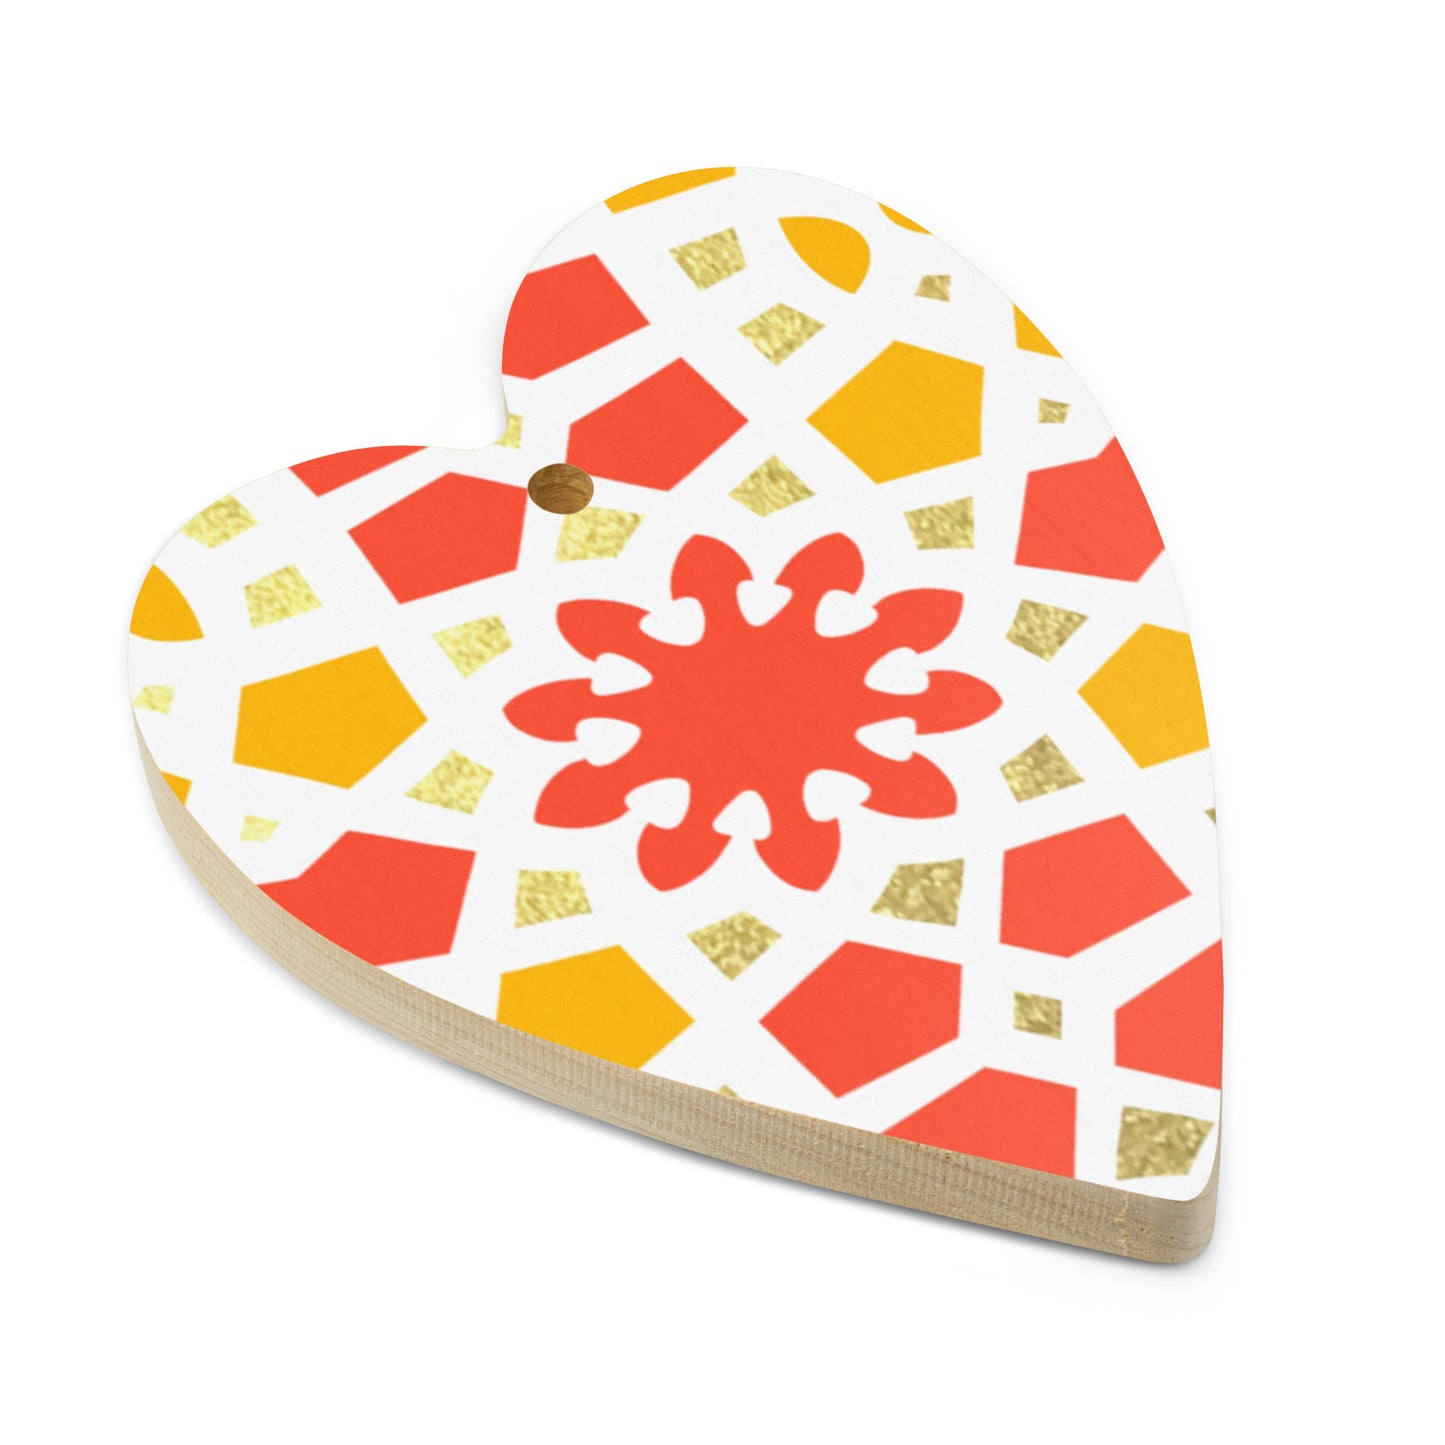 Wooden Holiday Ornaments - Geometric Arabesque in Orange Yellow and Gold